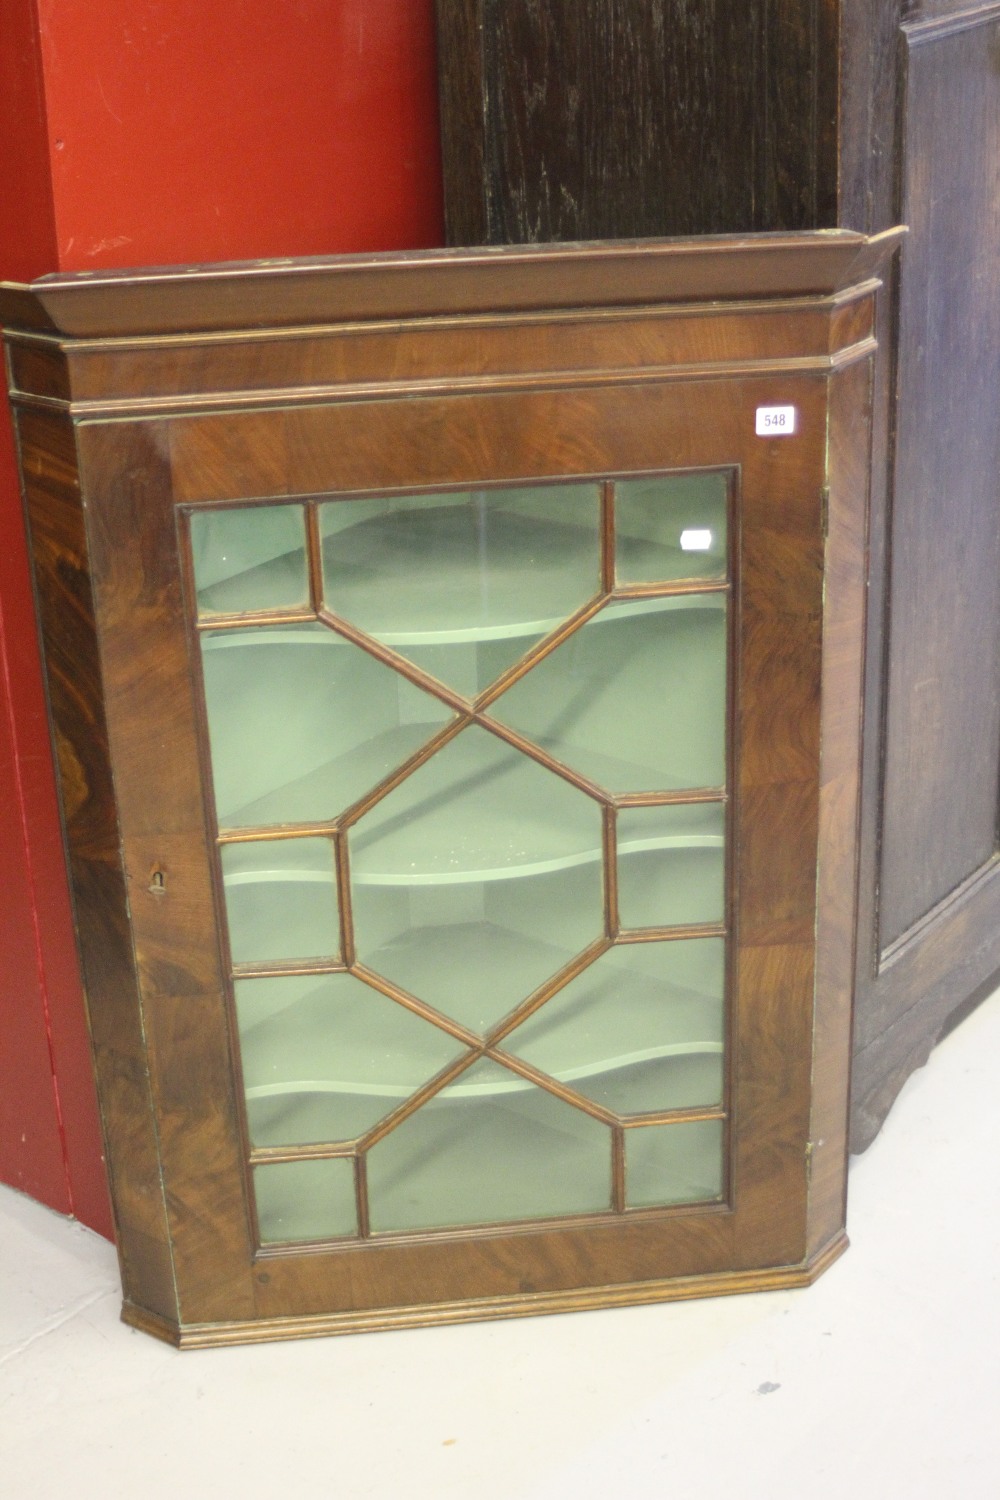 19th cent. Mahogany corner cupboard astral glazed door with shaped shelving.